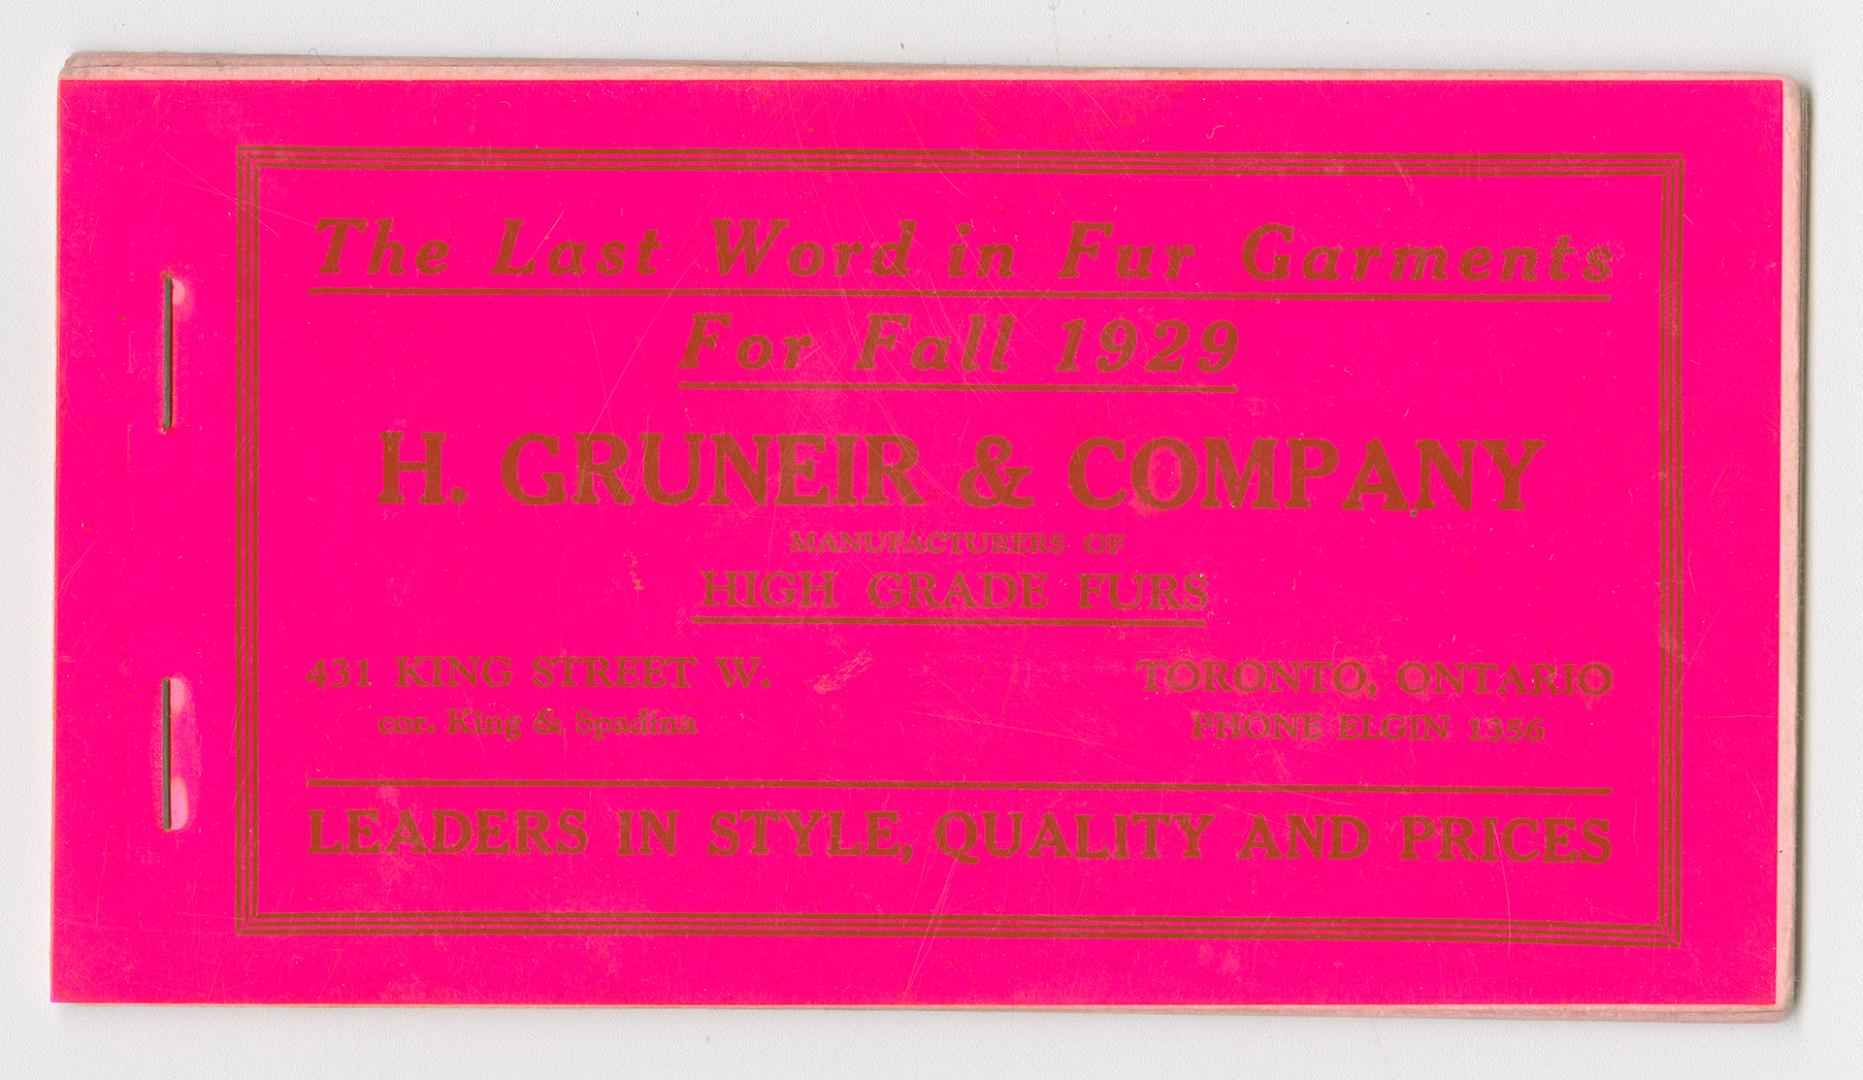 The last word in fur garments for fall 1929 H. Gruneir & Company manufacturers of high grade furs